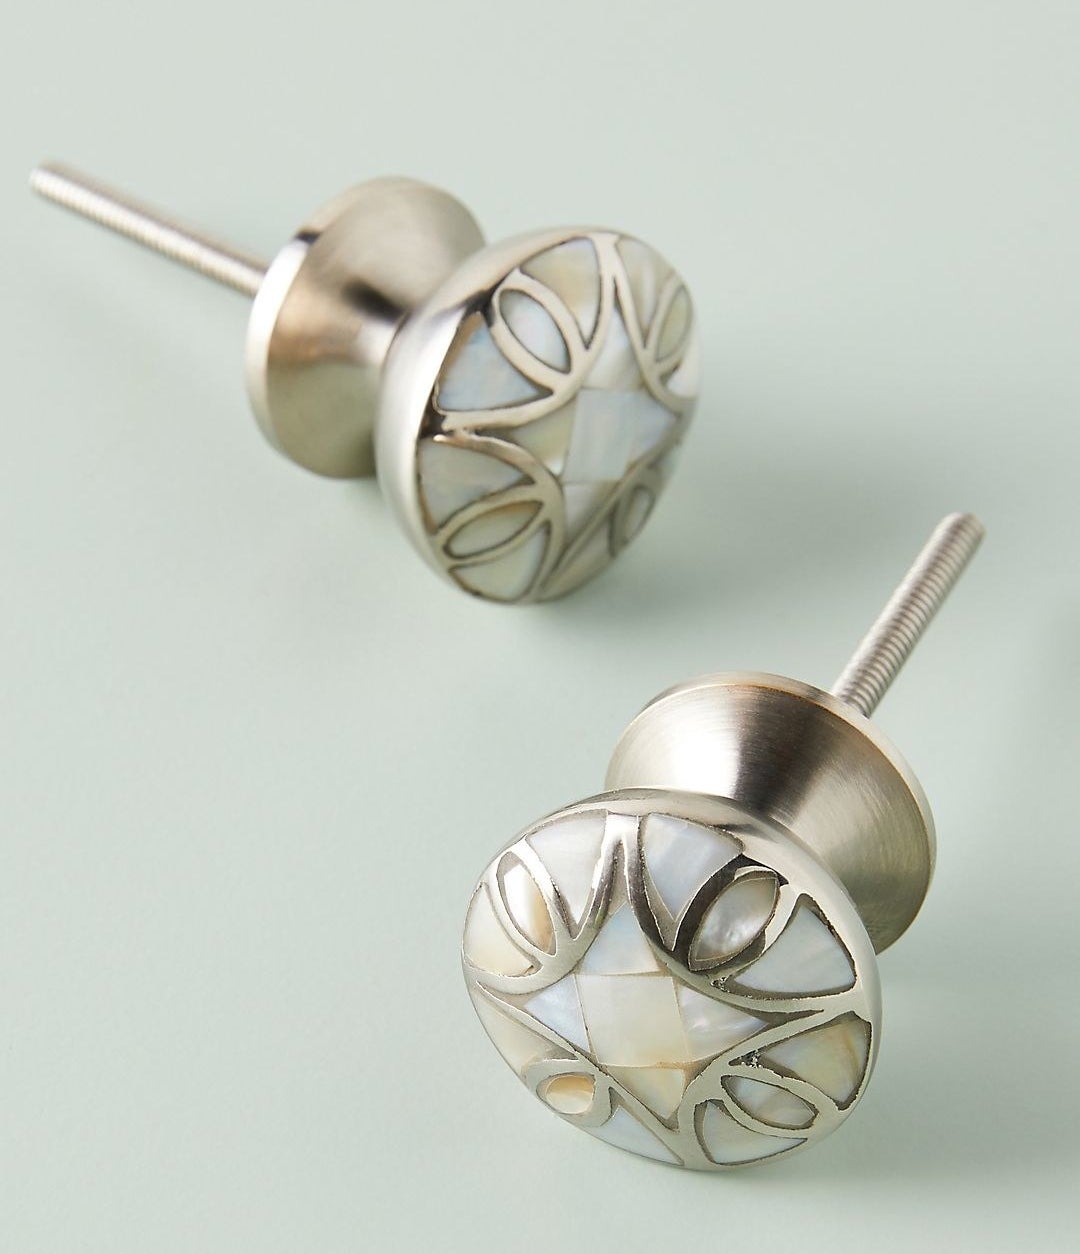 the silver-looking knobs with a mother of pearl design